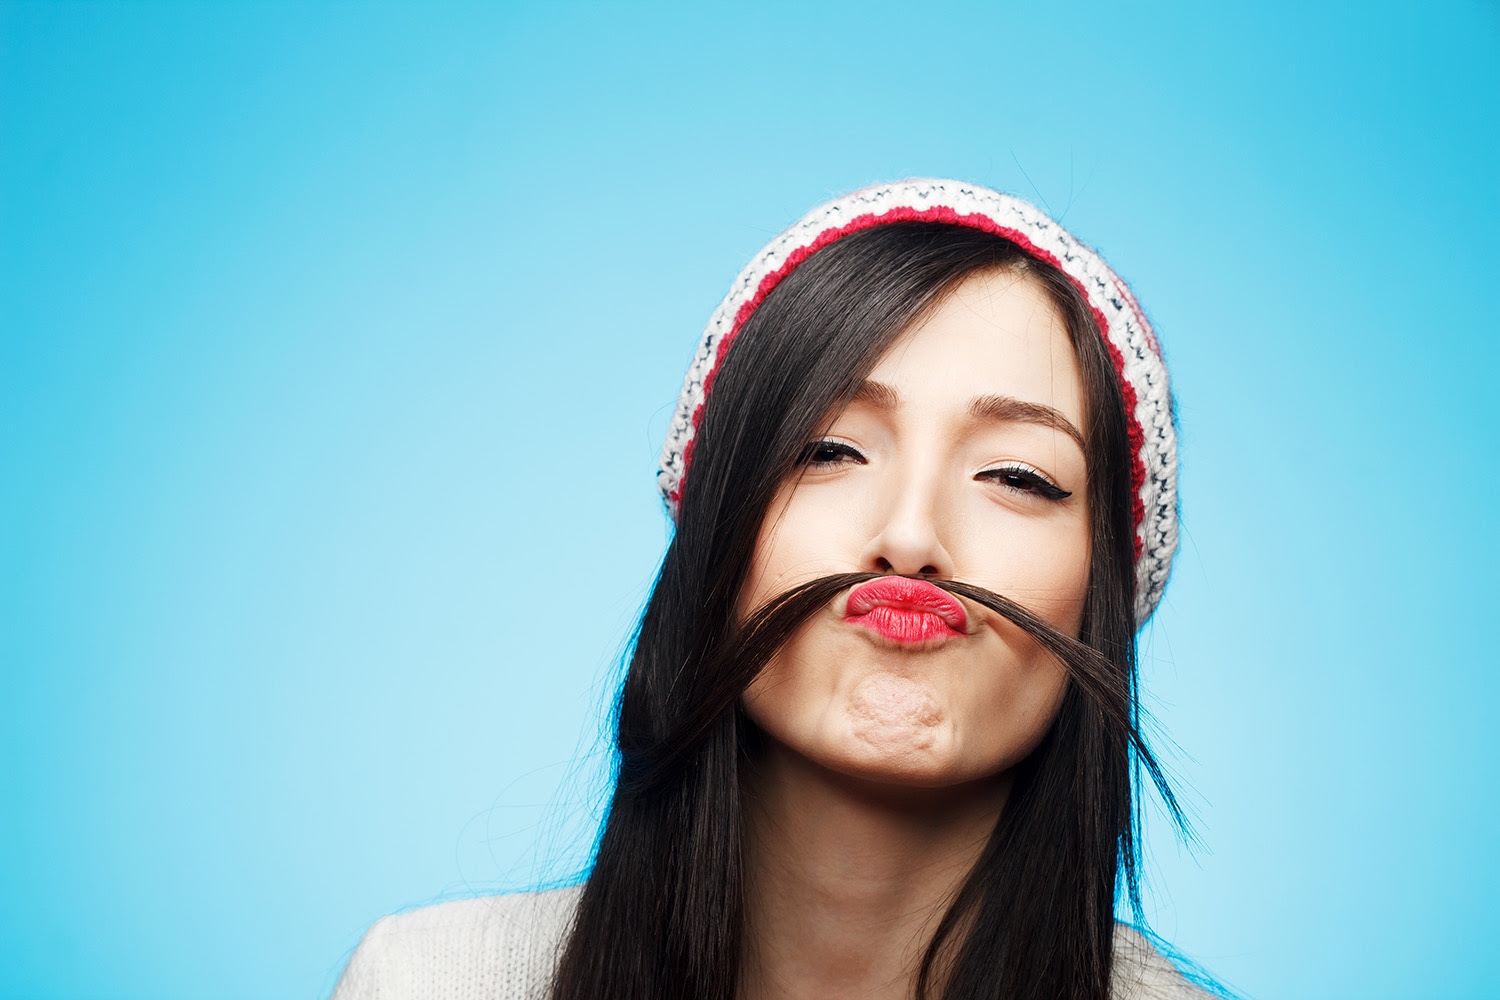 Cute Young Woman Pretending To Have A Mustache With Her Hair